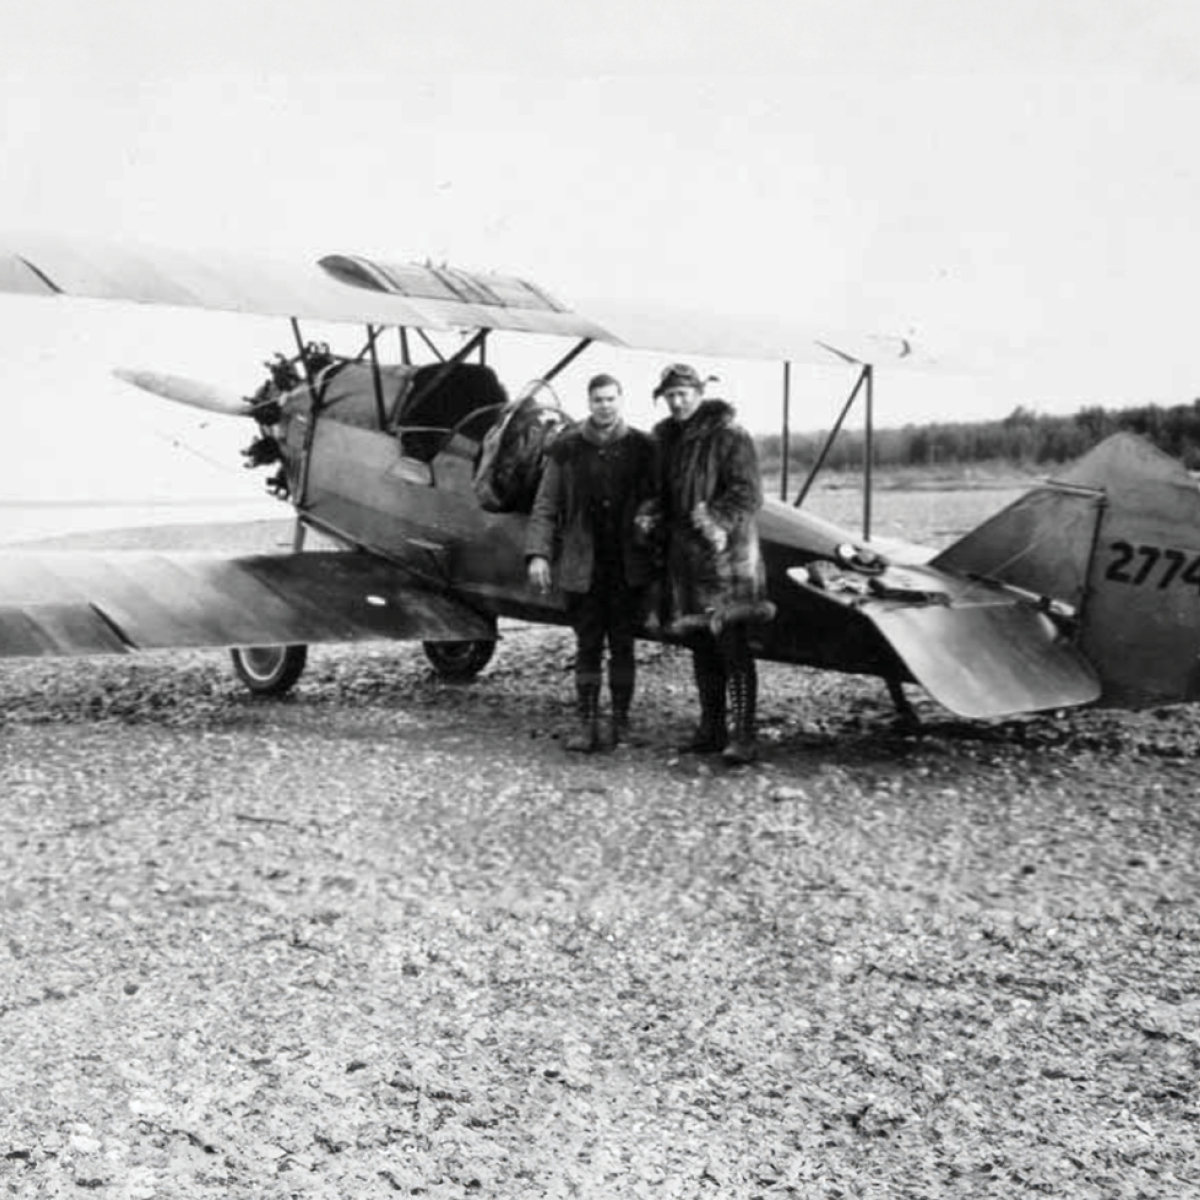 Happy Bob Bartlett Day! The Library of Congress estimates that Alaska’s Senator Bartlett achieved more bills passed into law than anyone else in history. 📸 : Bob Bartlett poses with A.A. Snider in front of a biplane.